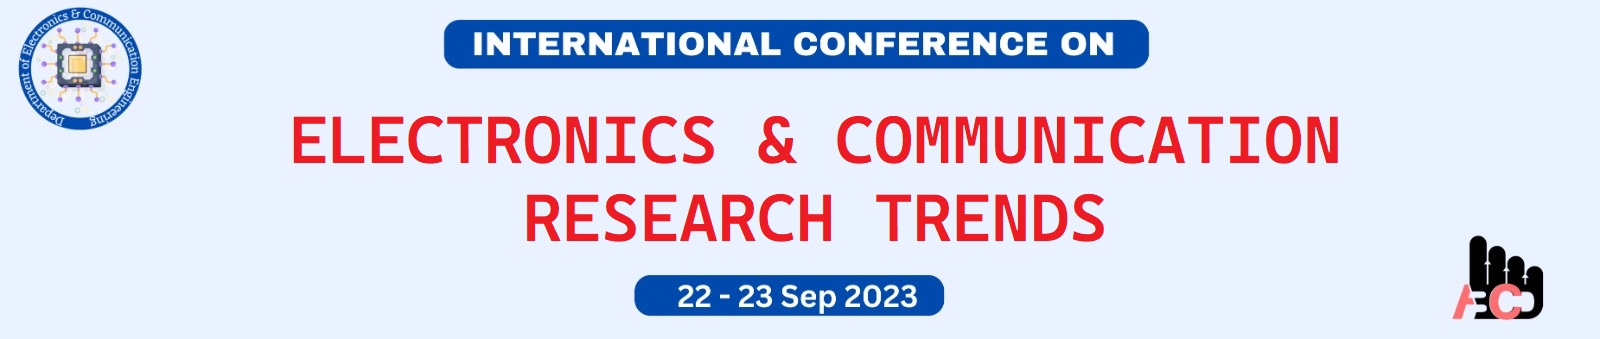 International Conference on Electronics and Communication Research Trends (ICECRT), Bhopal, Madhya Pradesh, India